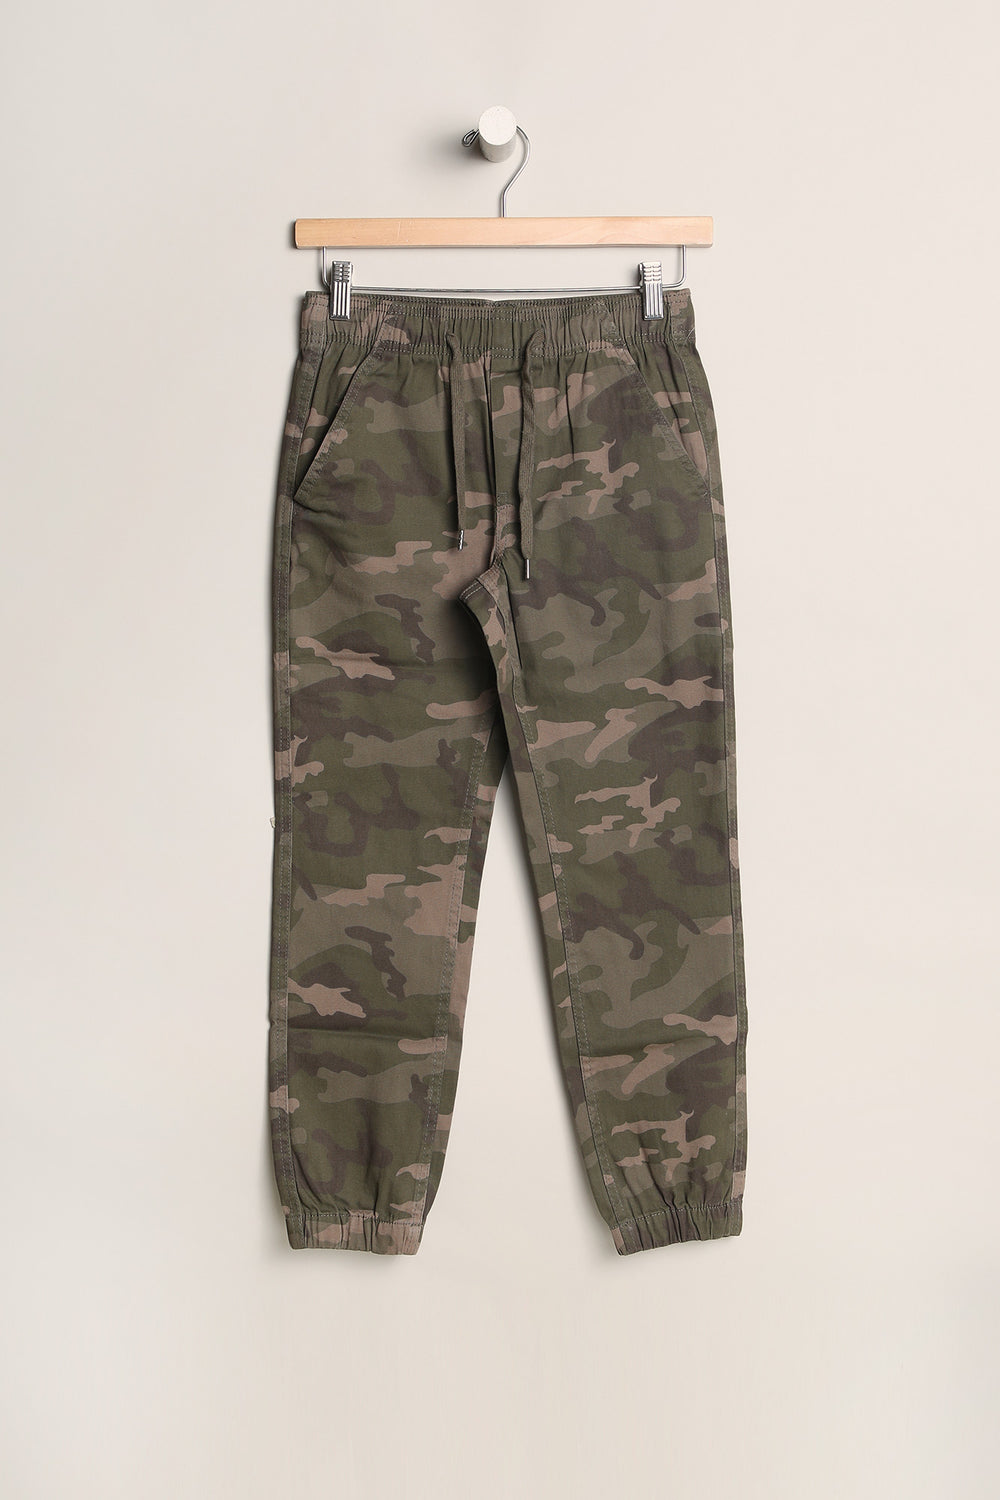 West49 Youth Slim Camo Jogger Camouflage